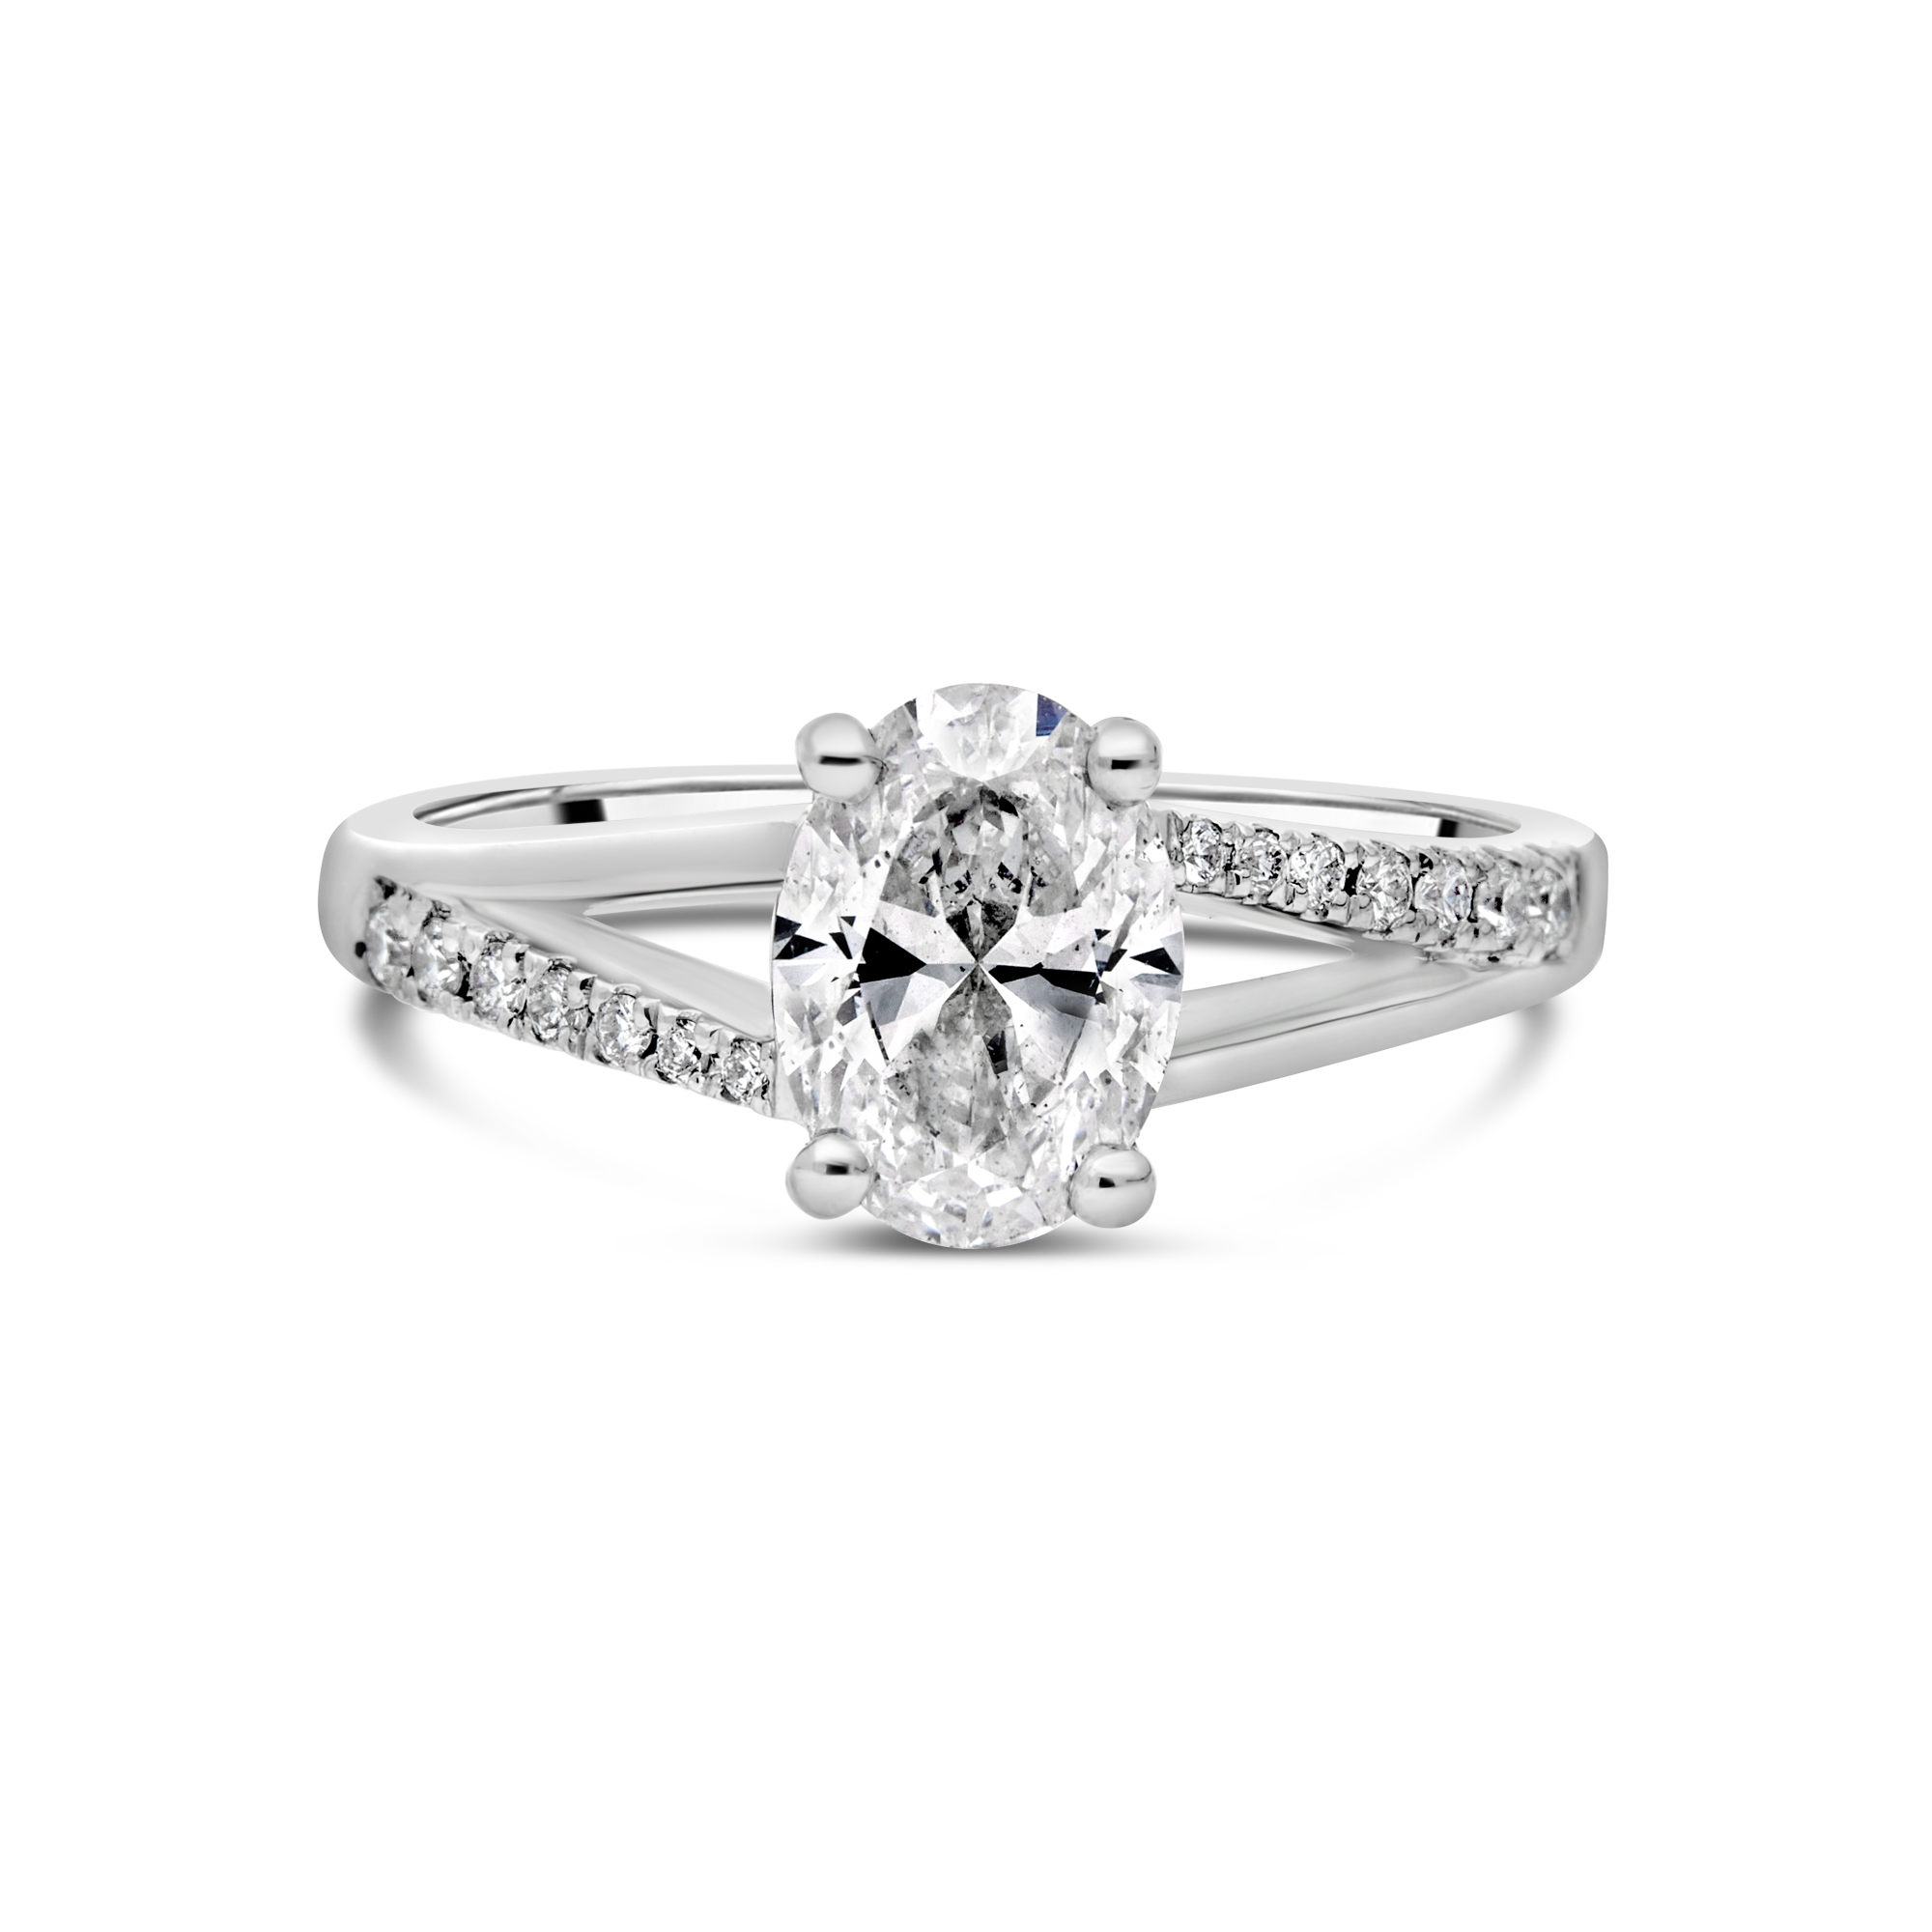 The "Niamh" Platinum Oval Diamond with Sides